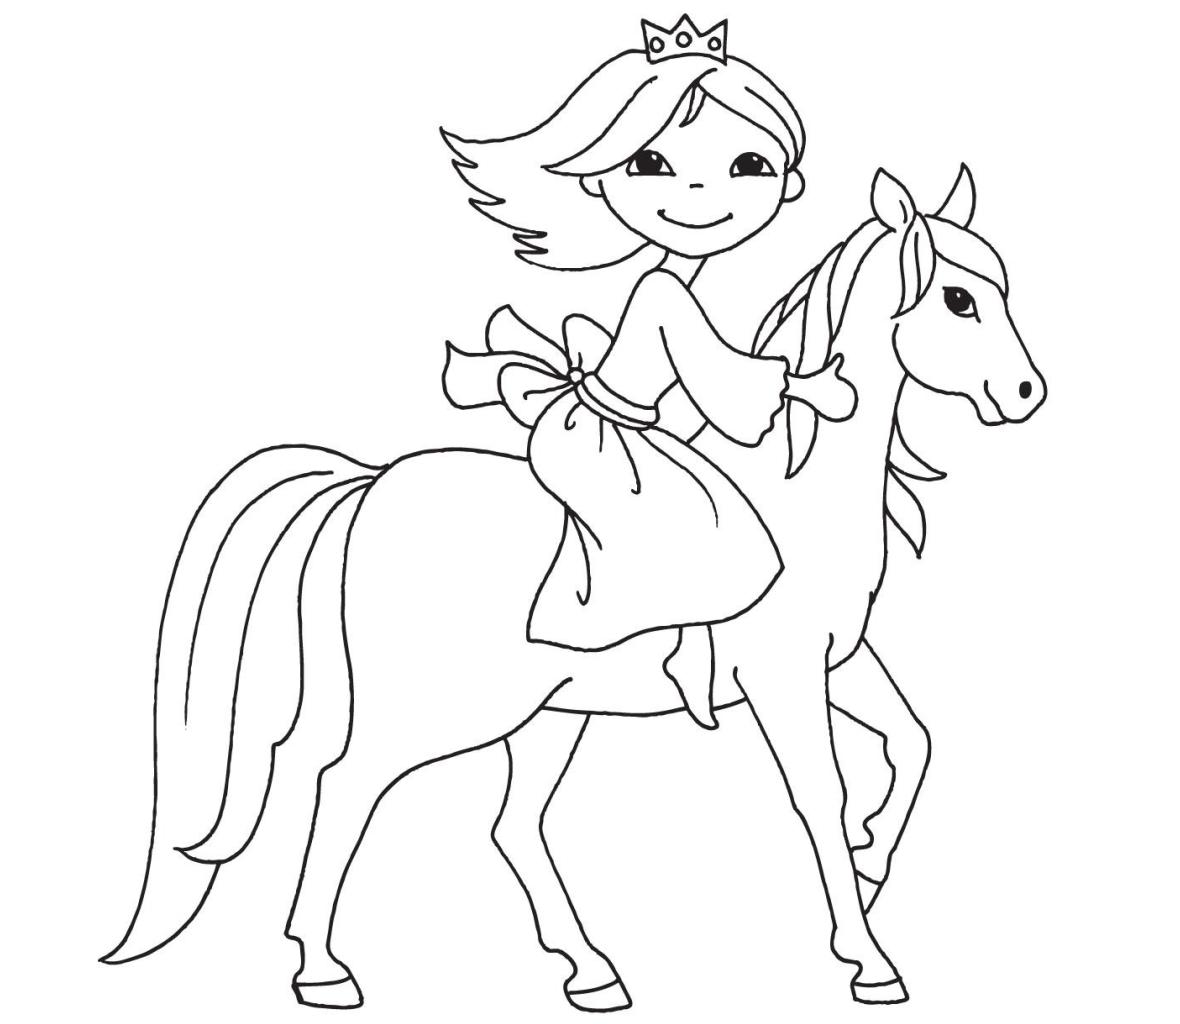 Simple Princesses coloring page to print and color for free